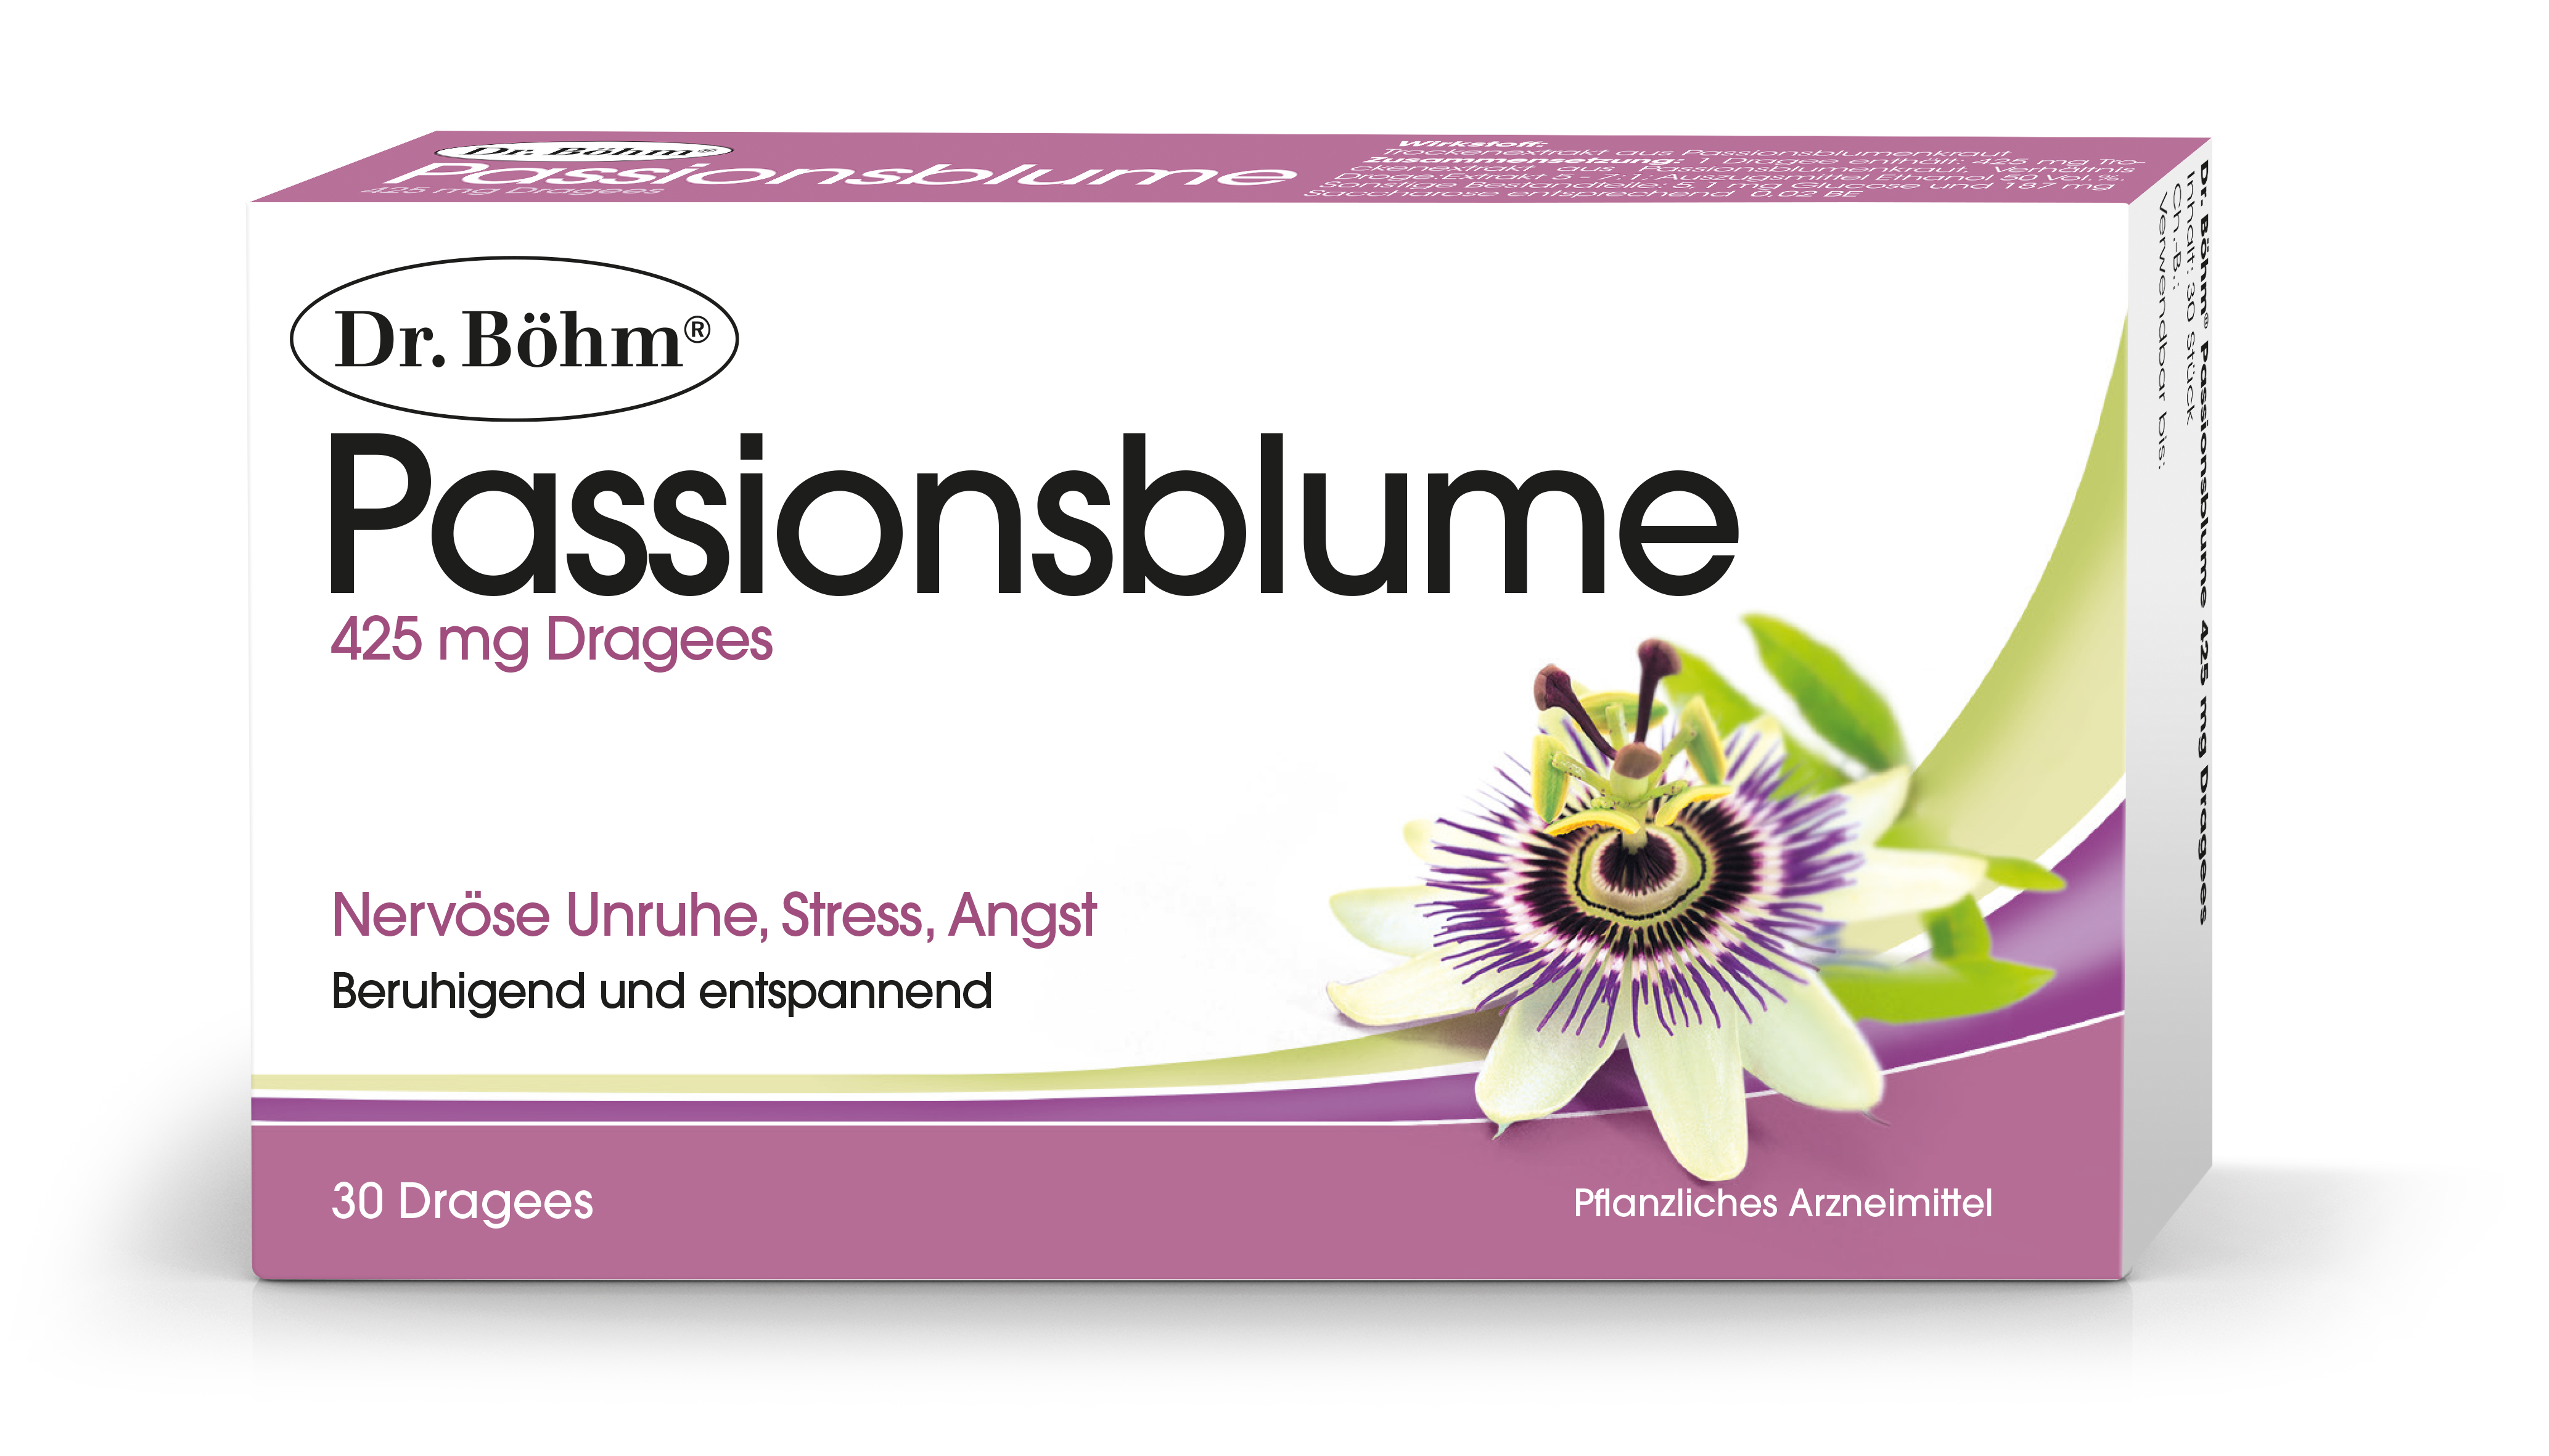 Dr. Böhm Passionsblume 425 mg - Dragees